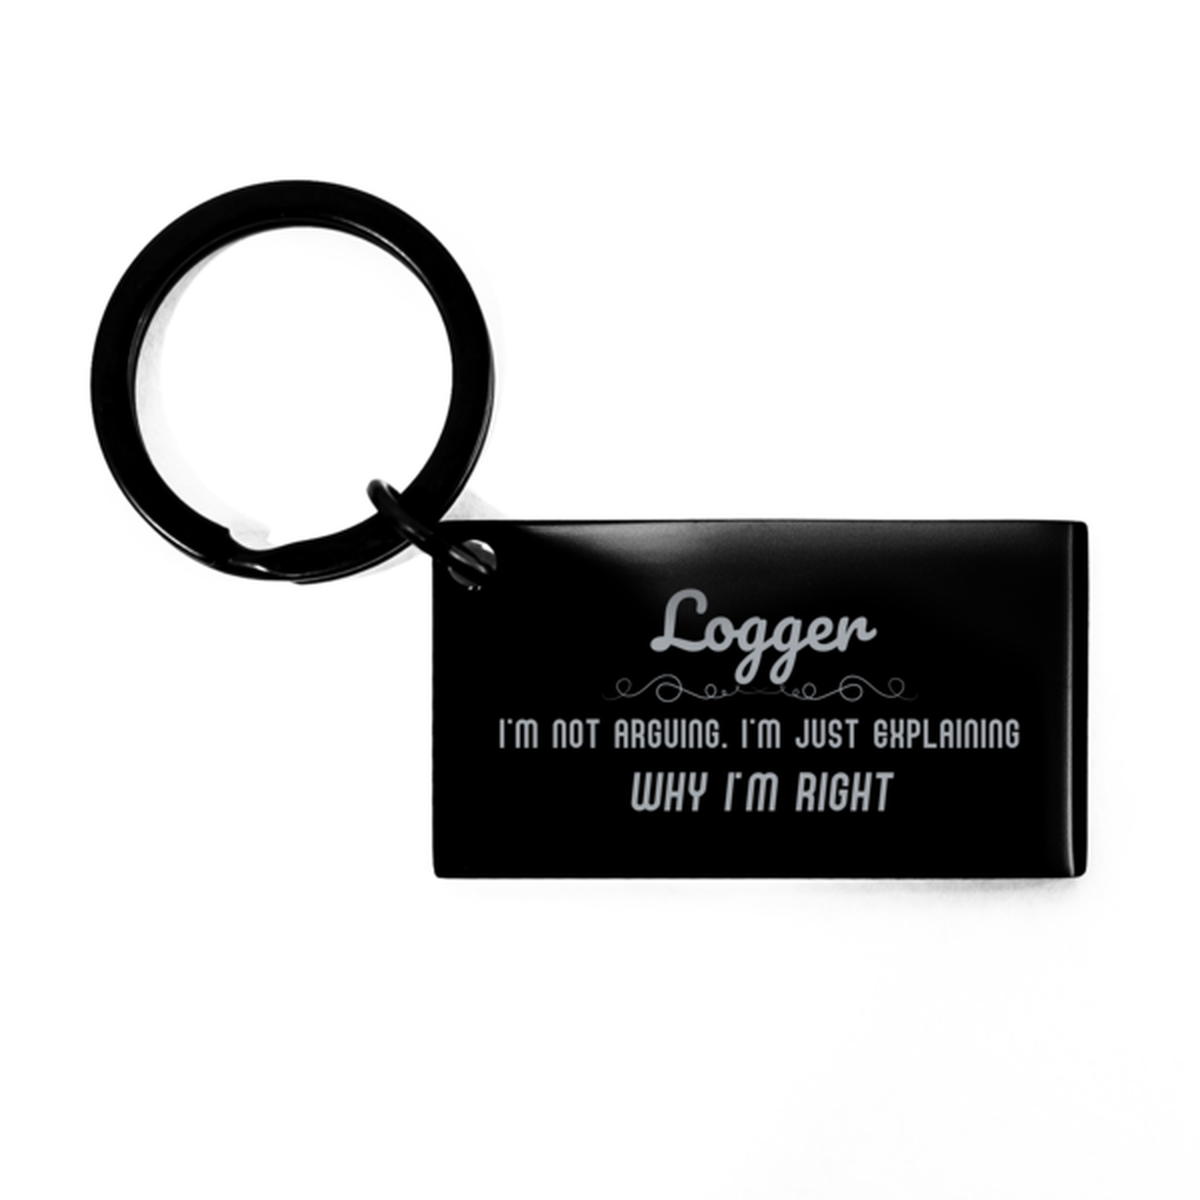 Logger I'm not Arguing. I'm Just Explaining Why I'm RIGHT Keychain, Funny Saying Quote Logger Gifts For Logger Graduation Birthday Christmas Gifts for Men Women Coworker